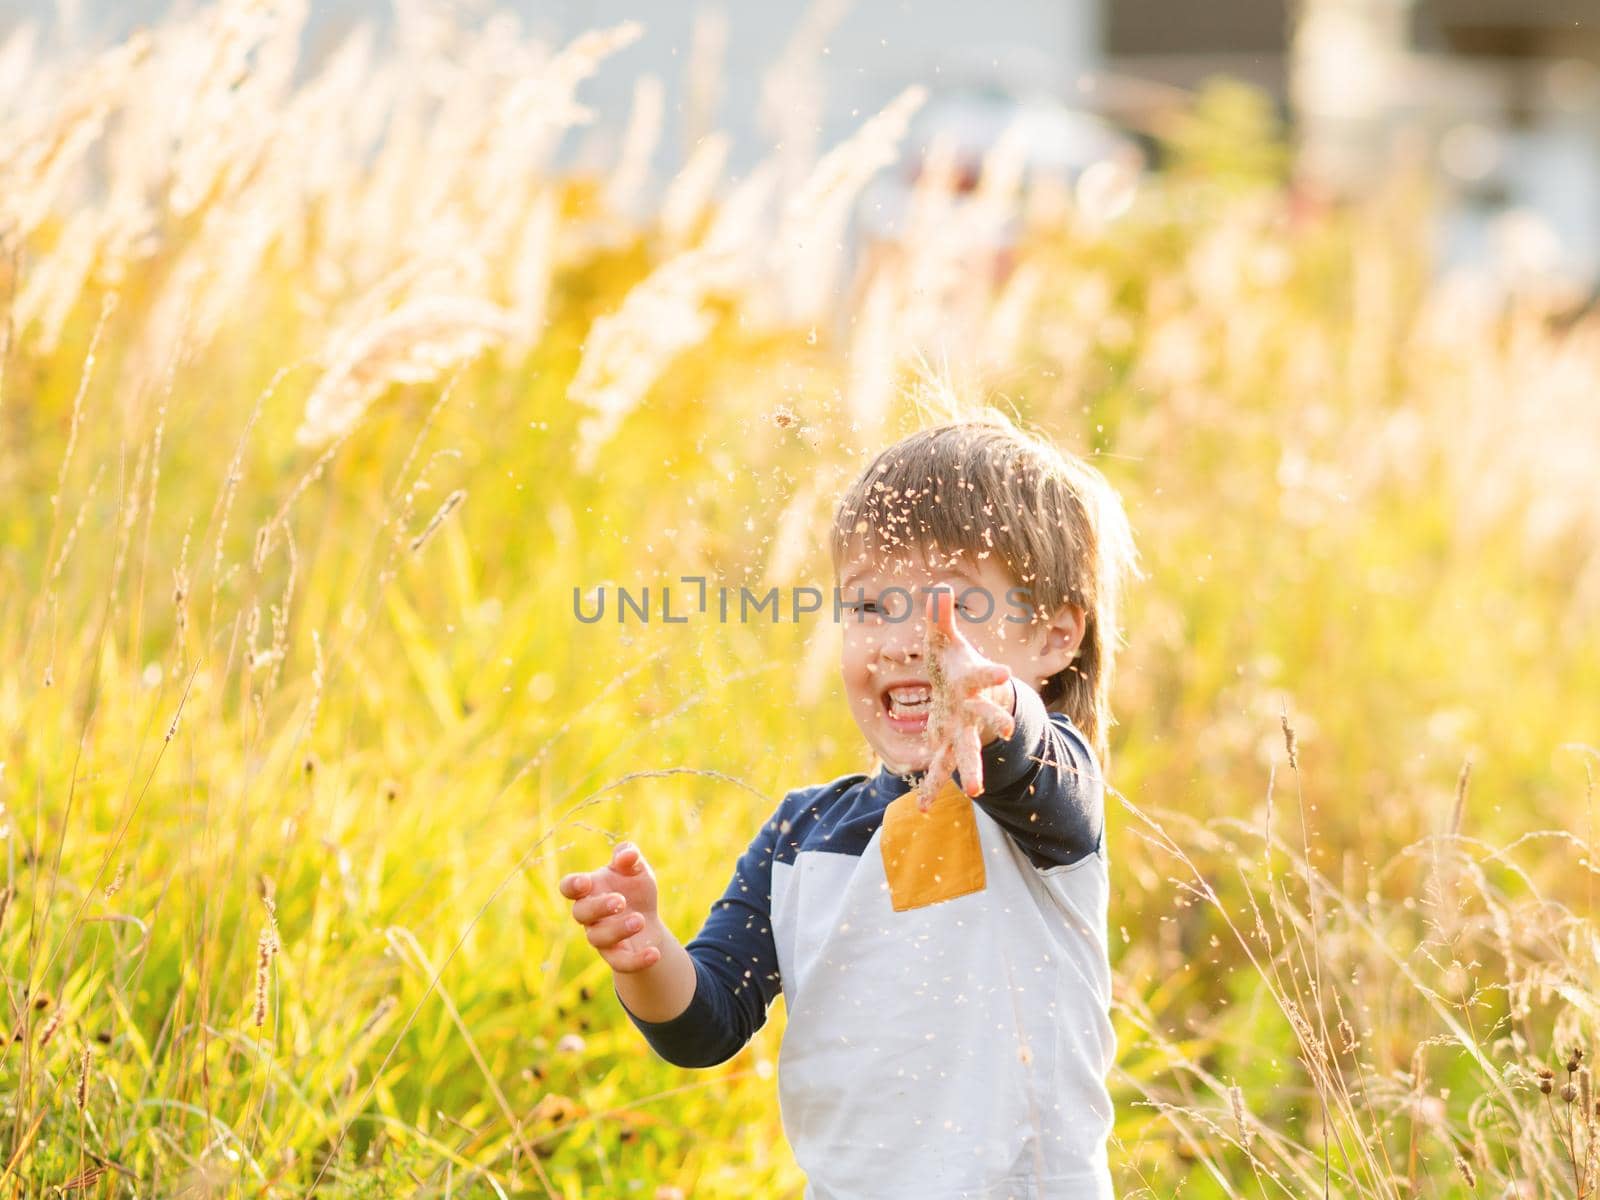 Cute toddler plays in field. Smiling boy throws plant seeds in the air. Autumn outdoor leisure activity for children. Fall season.